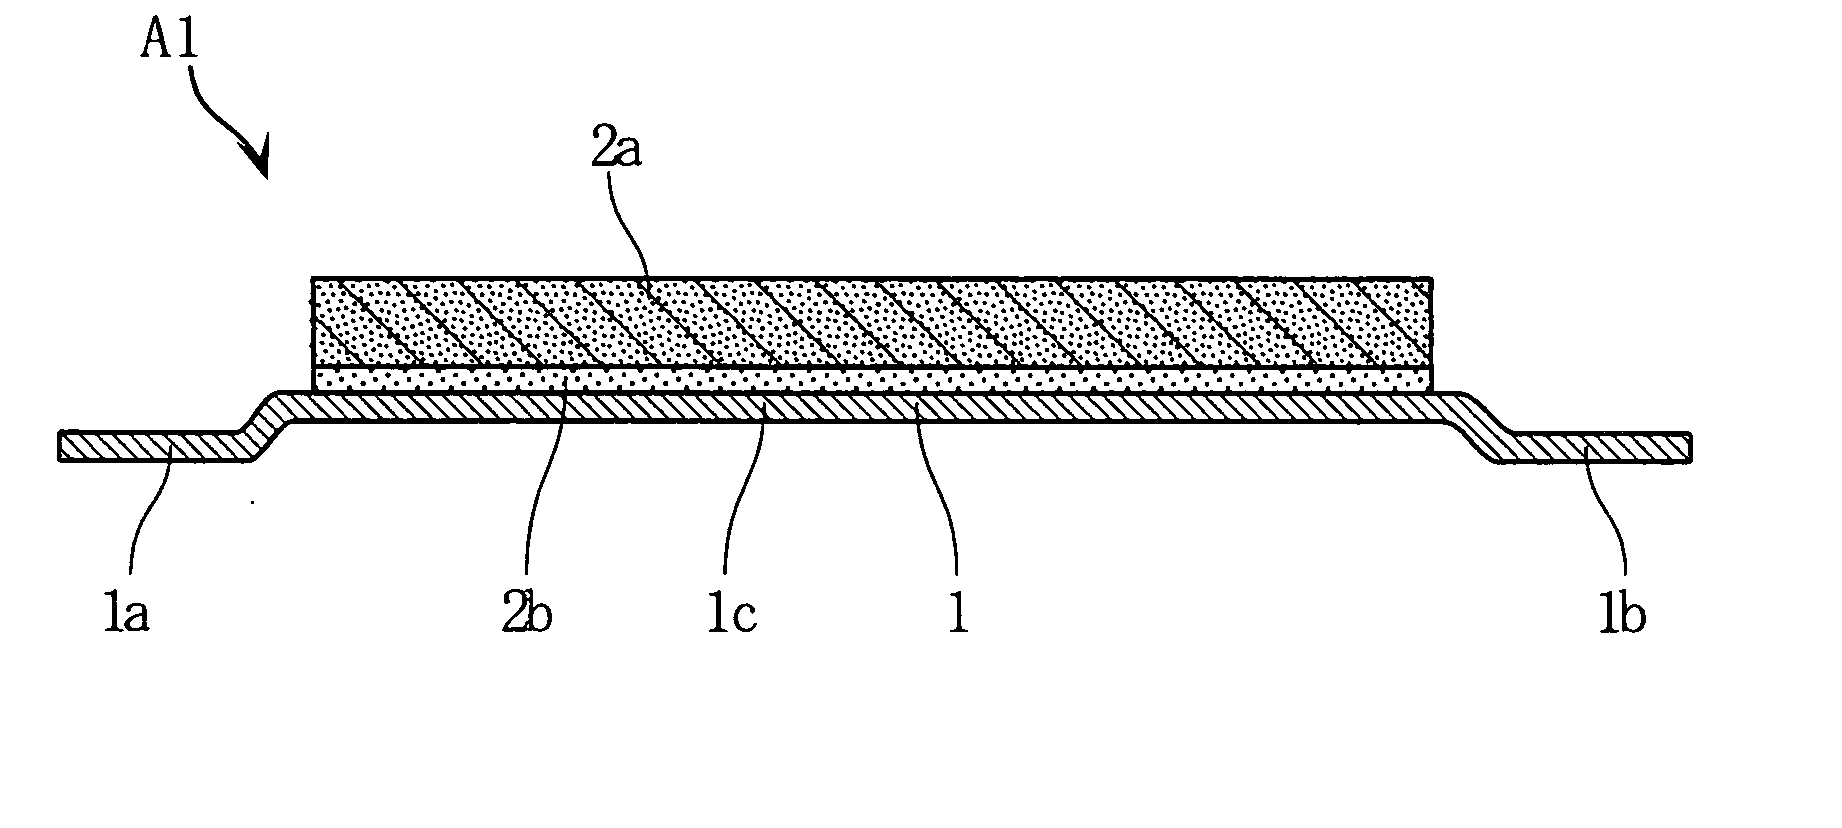 Solid Electrolytic Capacitor, Anode Used For Solid Electrolytic Capacitor, and Method of Manufacturing the Anode